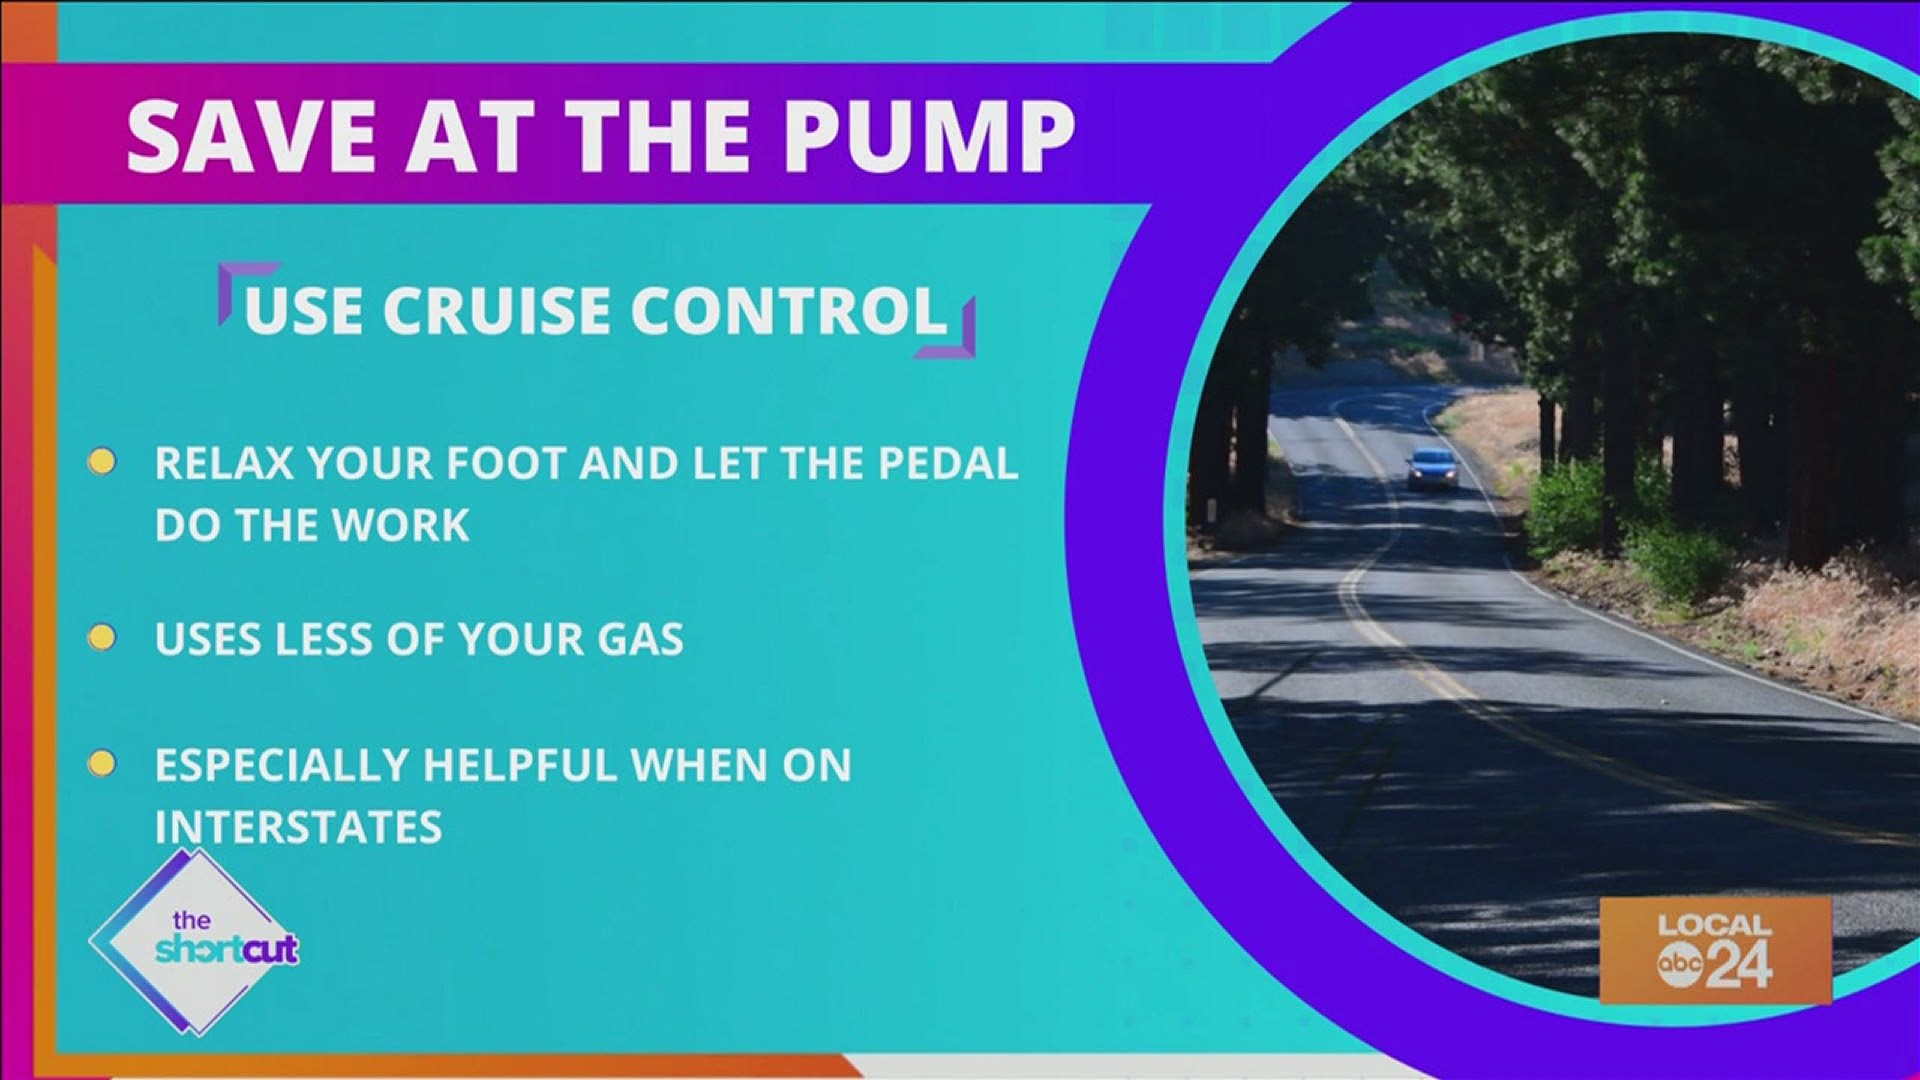 Did you know that Mondays are the cheapest days to get gas? Find out why, how, and other lifesaving gas money saving tips on "The Shortcut!" Starring Sydney Neely